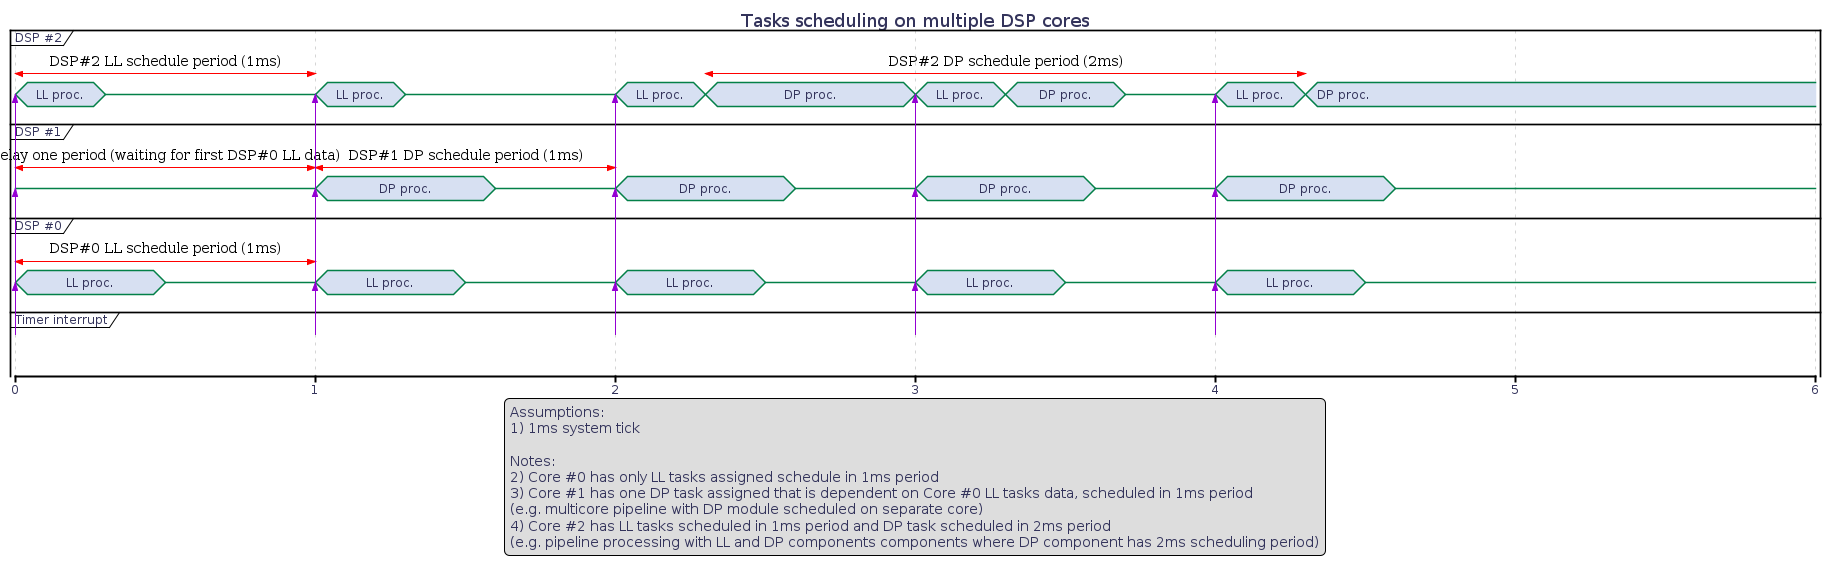 @startuml

Title Tasks scheduling on multiple DSP cores

legend
Assumptions:
1) 1ms system tick

Notes:
2) Core #0 has only LL tasks assigned schedule in 1ms period
3) Core #1 has one DP task assigned that is dependent on Core #0 LL tasks data, scheduled in 1ms period
(e.g. multicore pipeline with DP module scheduled on separate core)
4) Core #2 has LL tasks scheduled in 1ms period and DP task scheduled in 2ms period
(e.g. pipeline processing with LL and DP components components where DP component has 2ms scheduling period)
end legend

scale 1 as 300 pixels

concise "DSP #2" as DSP_2
concise "DSP #1" as DSP_1
concise "DSP #0" as DSP_0

concise "Timer interrupt" as Interrupt

@DSP_0
0 is "LL proc."
0.5 is {-}

1 is "LL proc."
1.5 is {-}

2 is "LL proc."
2.5 is {-}

3 is "LL proc."
3.5 is {-}

4 is "LL proc."
4.5 is {-}

@0 <-> @1: DSP#0 LL schedule period (1ms)

@DSP_1
0 is {-}

1 is "DP proc."
1.6 is {-}

2 is "DP proc."
2.6 is {-}

3 is "DP proc."
3.6 is {-}

4 is "DP proc."
4.6 is {-}
5 is {-}

@0 <-> @1: delay one period (waiting for first DSP#0 LL data)
@1 <-> @2: DSP#1 DP schedule period (1ms)

@DSP_2

0 is "LL proc."
0.3 is {-}

1 is "LL proc."
1.3 is {-}

2 is "LL proc."
2.3 is "DP proc."

3 is "LL proc."
3.3 is "DP proc."
3.7 is {-}

4 is "LL proc."
4.3 is "DP proc."

@0 <-> @1: DSP#2 LL schedule period (1ms)
@2.3 <-> @4.3: DSP#2 DP schedule period (2ms)

@0
Interrupt -[#DarkViolet]> DSP_0
Interrupt -[#DarkViolet]> DSP_1
Interrupt -[#DarkViolet]> DSP_2

@1
Interrupt -[#DarkViolet]> DSP_0
Interrupt -[#DarkViolet]> DSP_1
Interrupt -[#DarkViolet]> DSP_2

@2
Interrupt -[#DarkViolet]> DSP_0
Interrupt -[#DarkViolet]> DSP_1
Interrupt -[#DarkViolet]> DSP_2

@3
Interrupt -[#DarkViolet]> DSP_0
Interrupt -[#DarkViolet]> DSP_1
Interrupt -[#DarkViolet]> DSP_2

@4
Interrupt -[#DarkViolet]> DSP_0
Interrupt -[#DarkViolet]> DSP_1
Interrupt -[#DarkViolet]> DSP_2

@enduml
